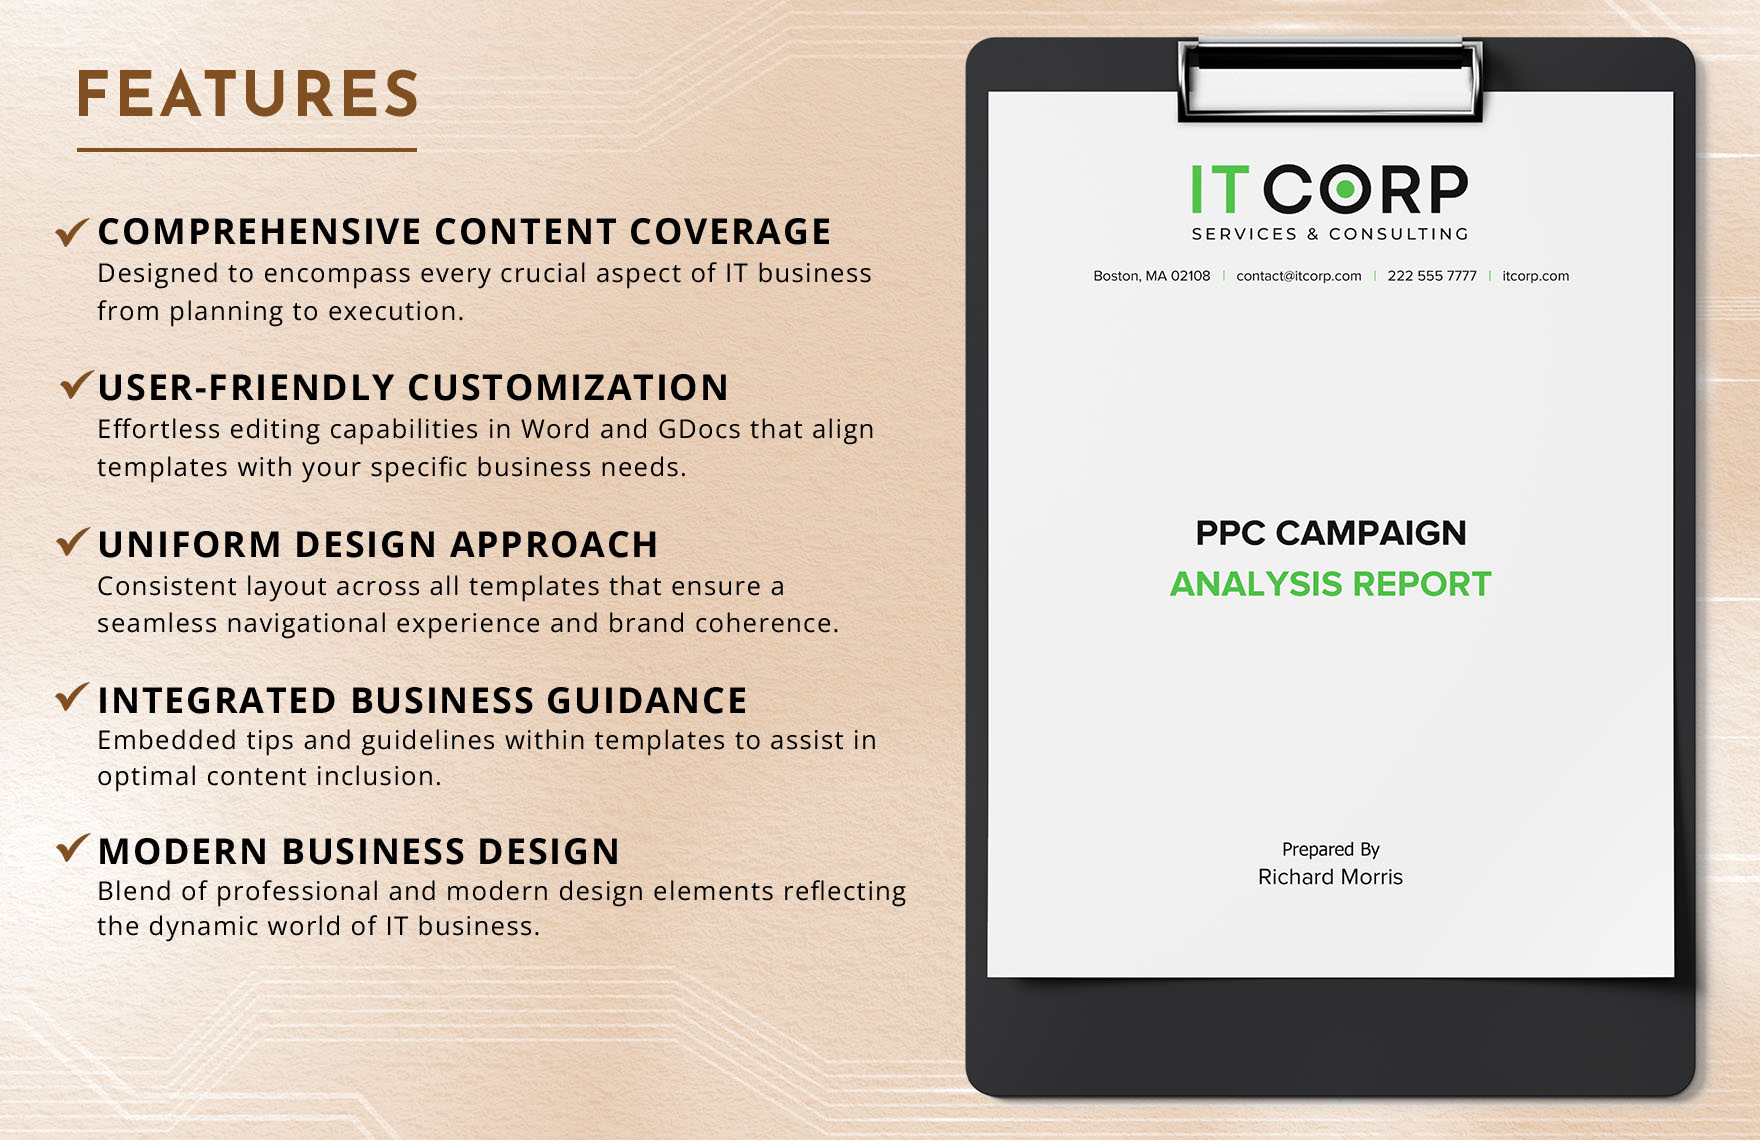 PPC Campaign Analysis Report Template